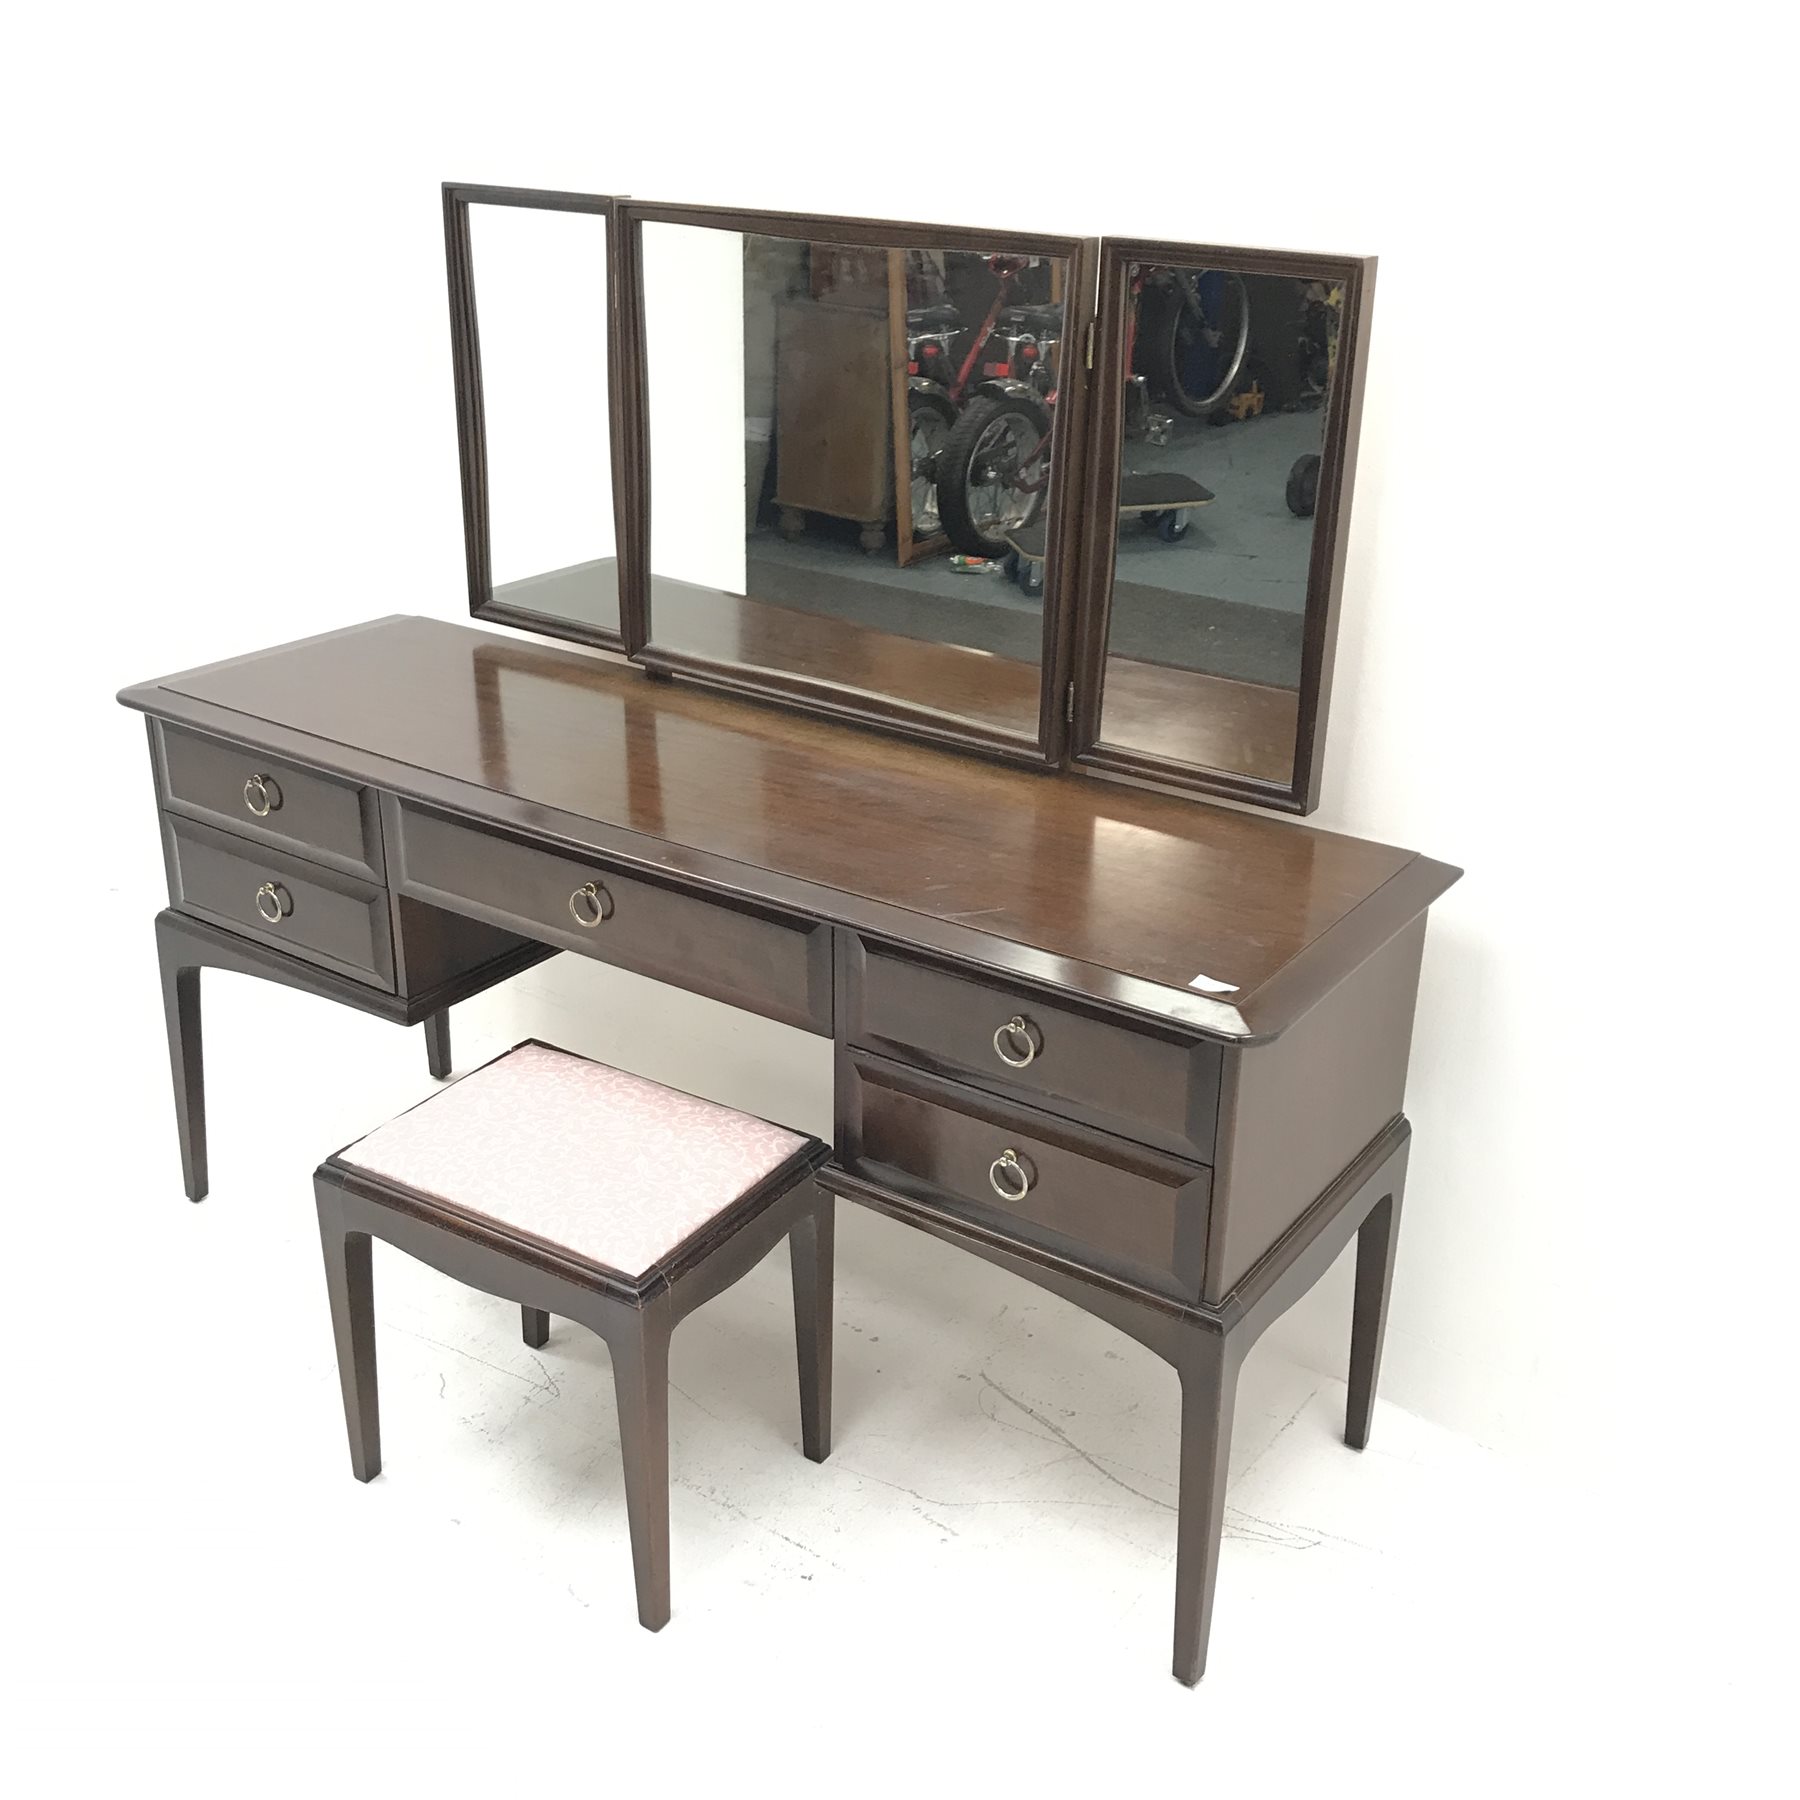 Stag mahogany dressing table, raised three piece mirror back, five drawers, square tapering supports - Image 3 of 3